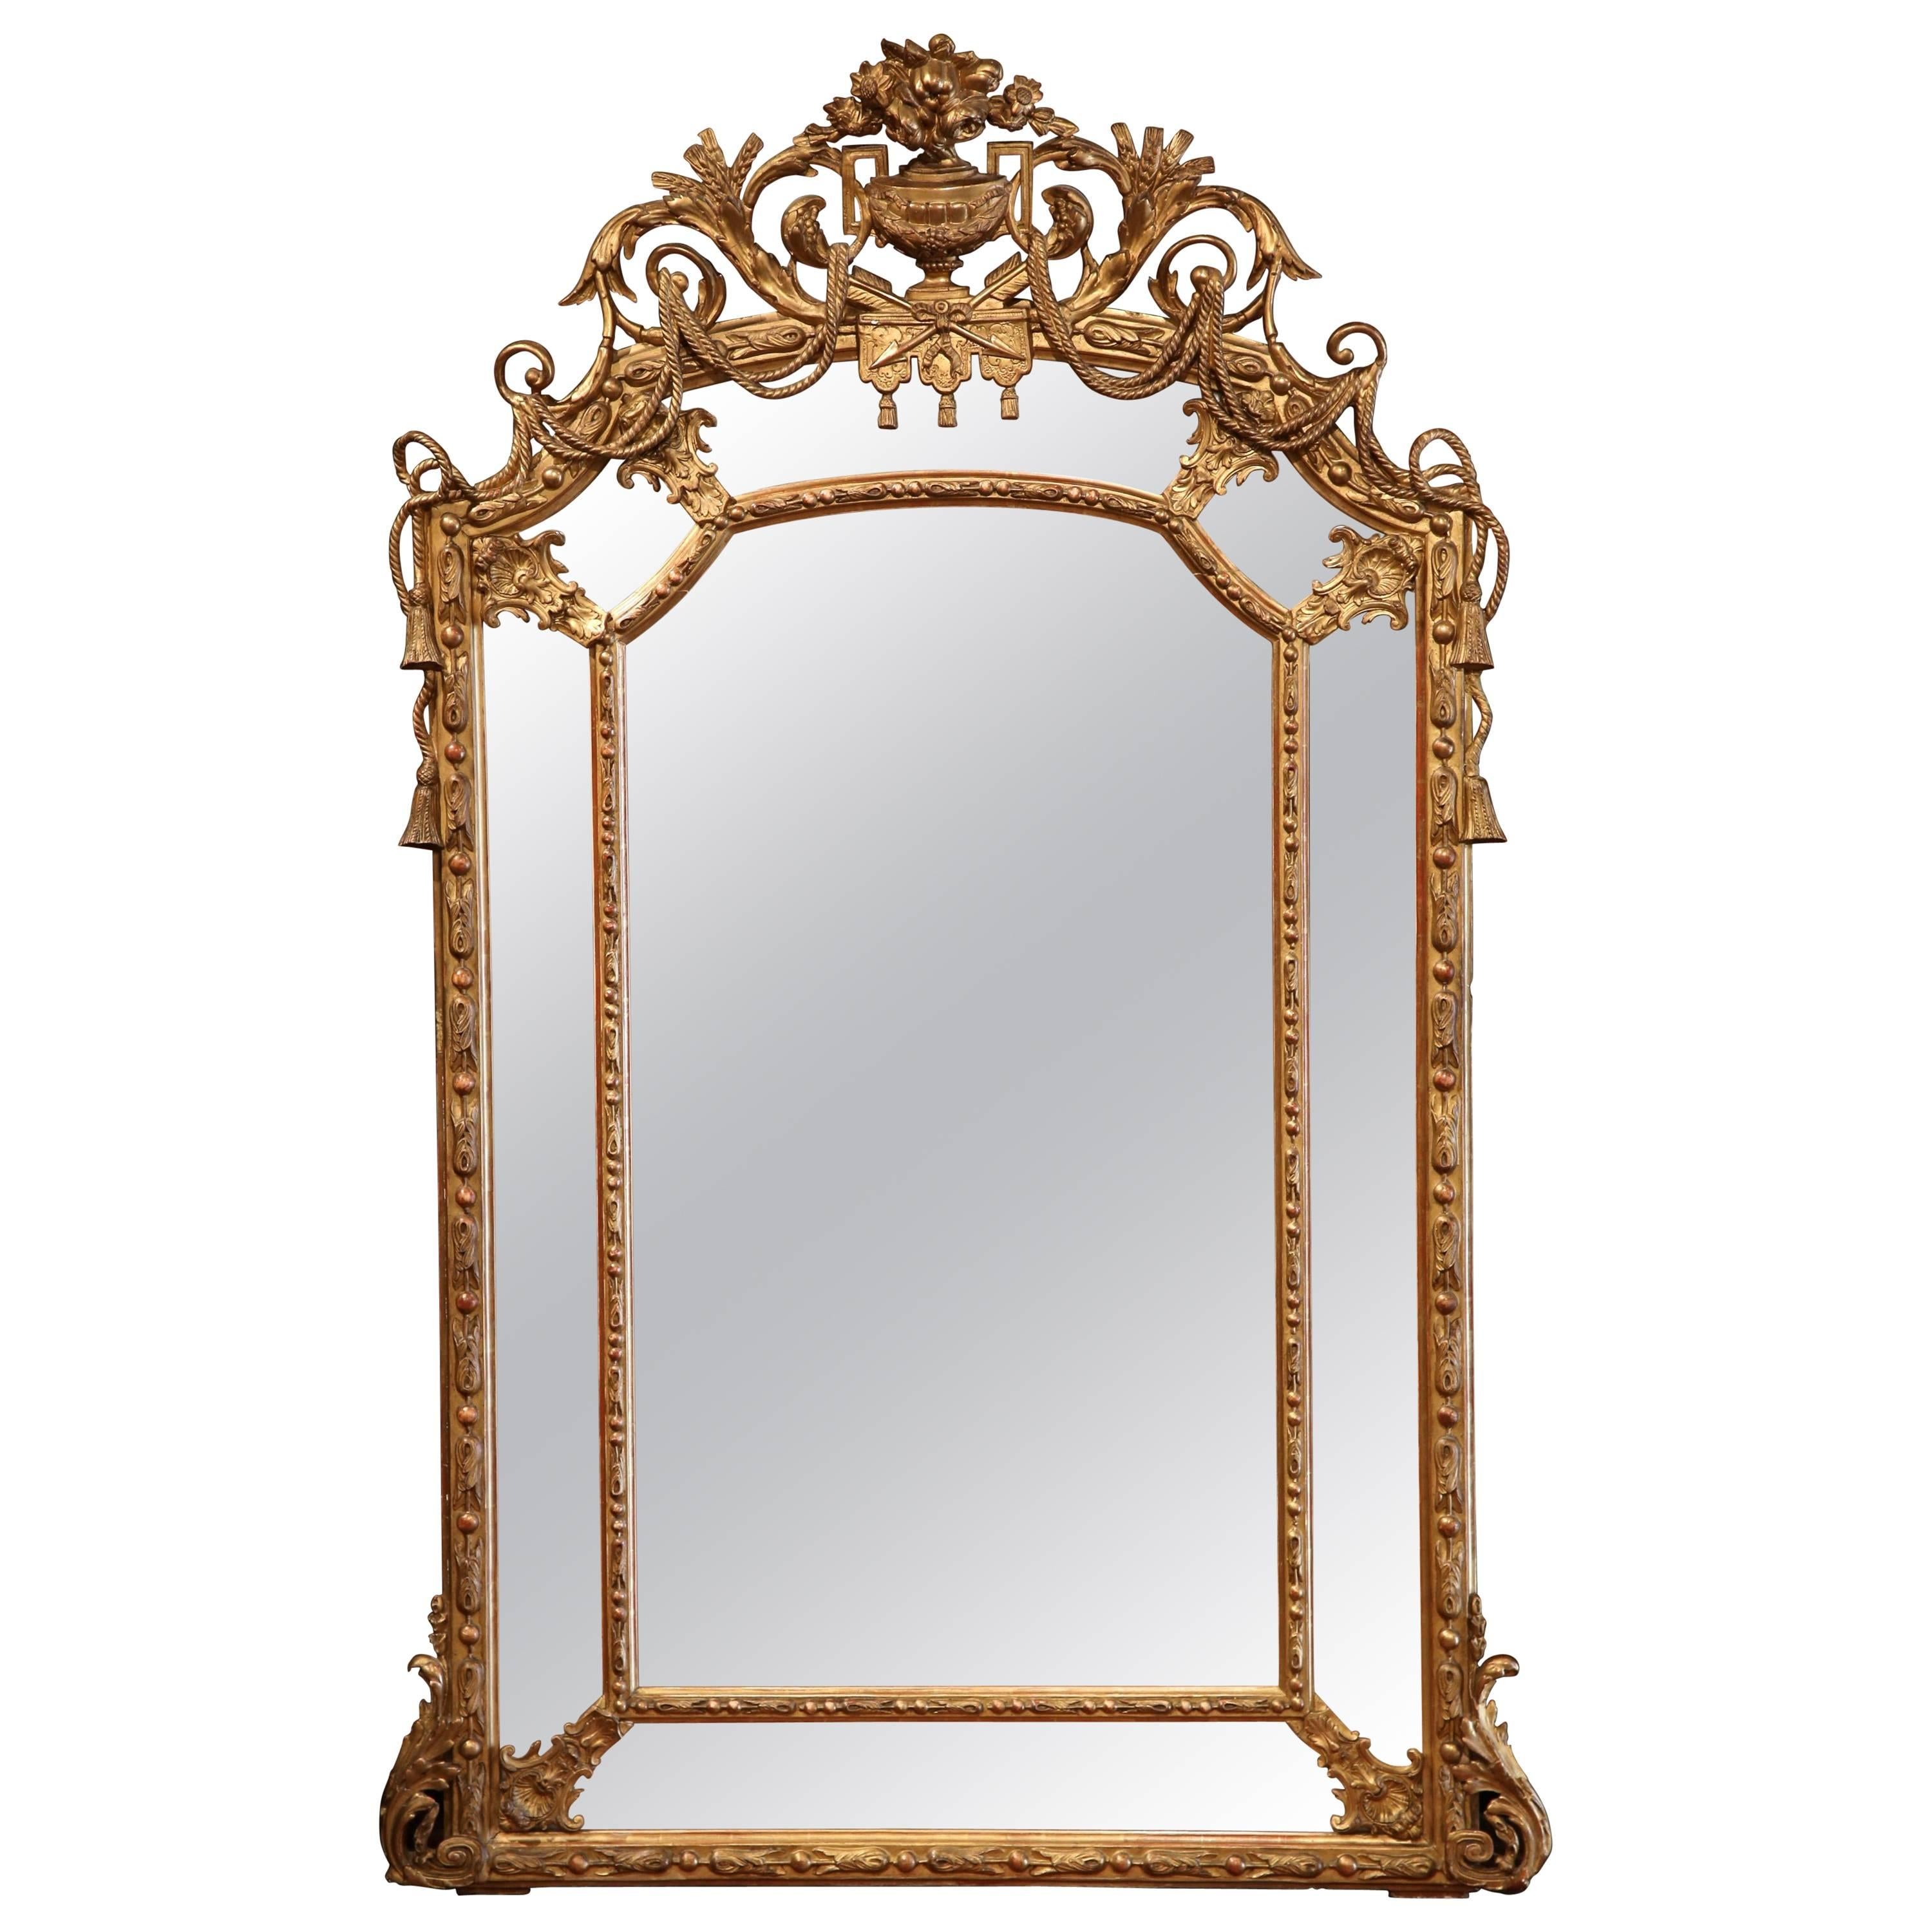 Mid-19th Century French Louis XV Carved Giltwood Parclose Mantel Mirror